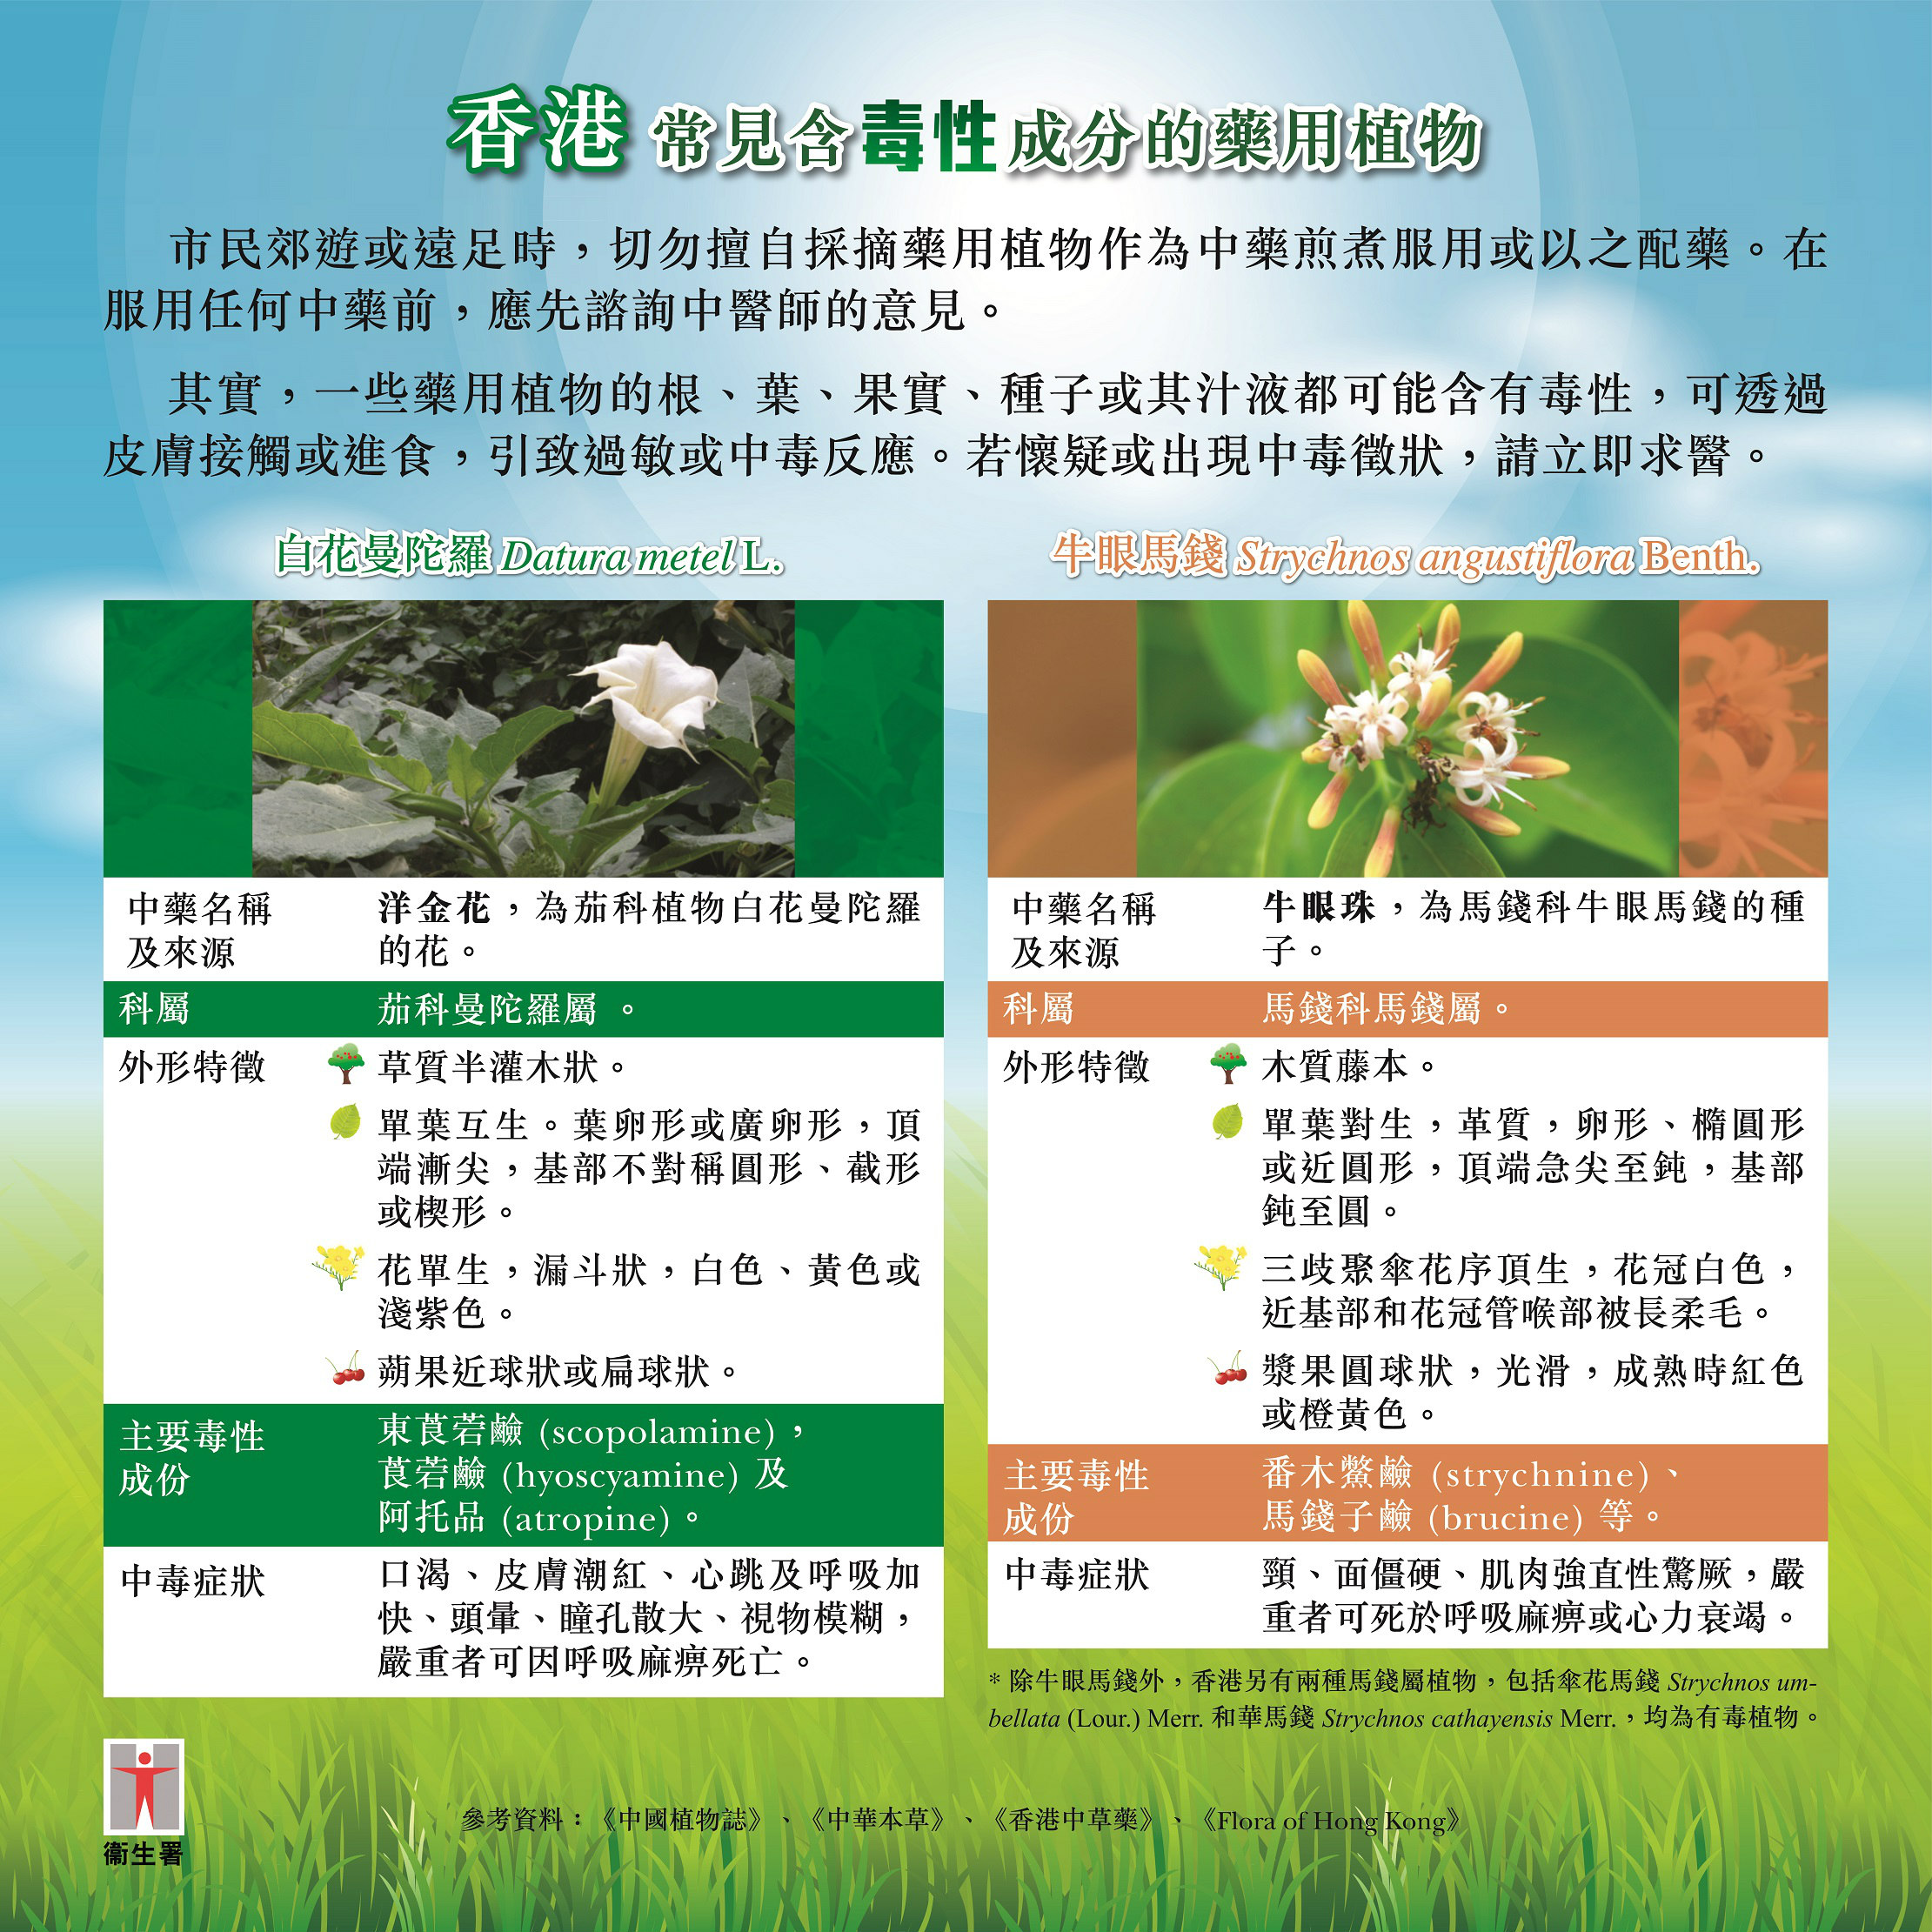 Common Toxic Plants in Hong Kong (Exhibition Board)(Chinese)